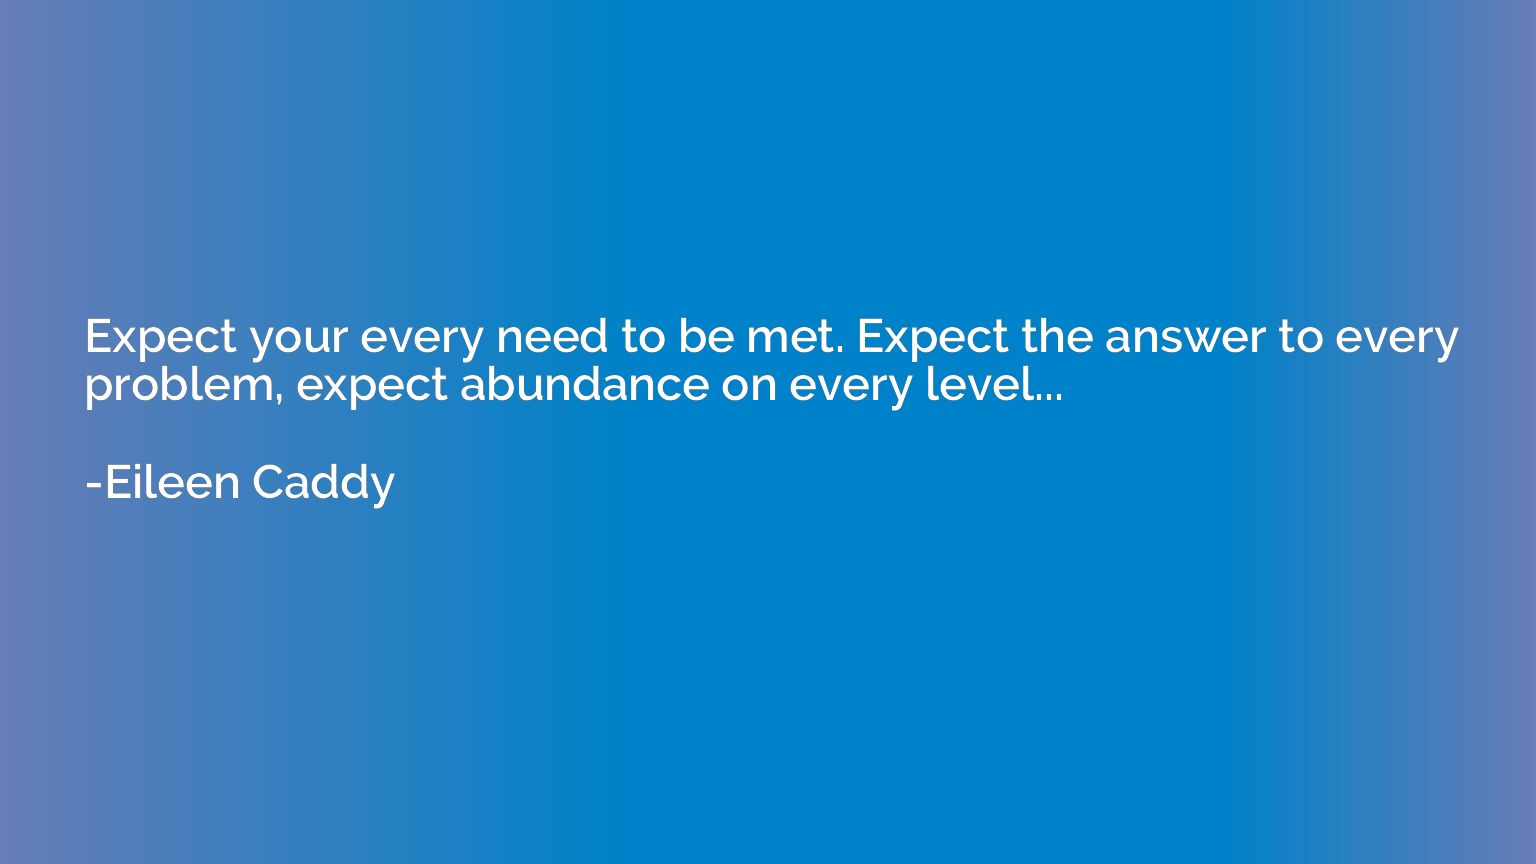 Expect your every need to be met. Expect the answer to every